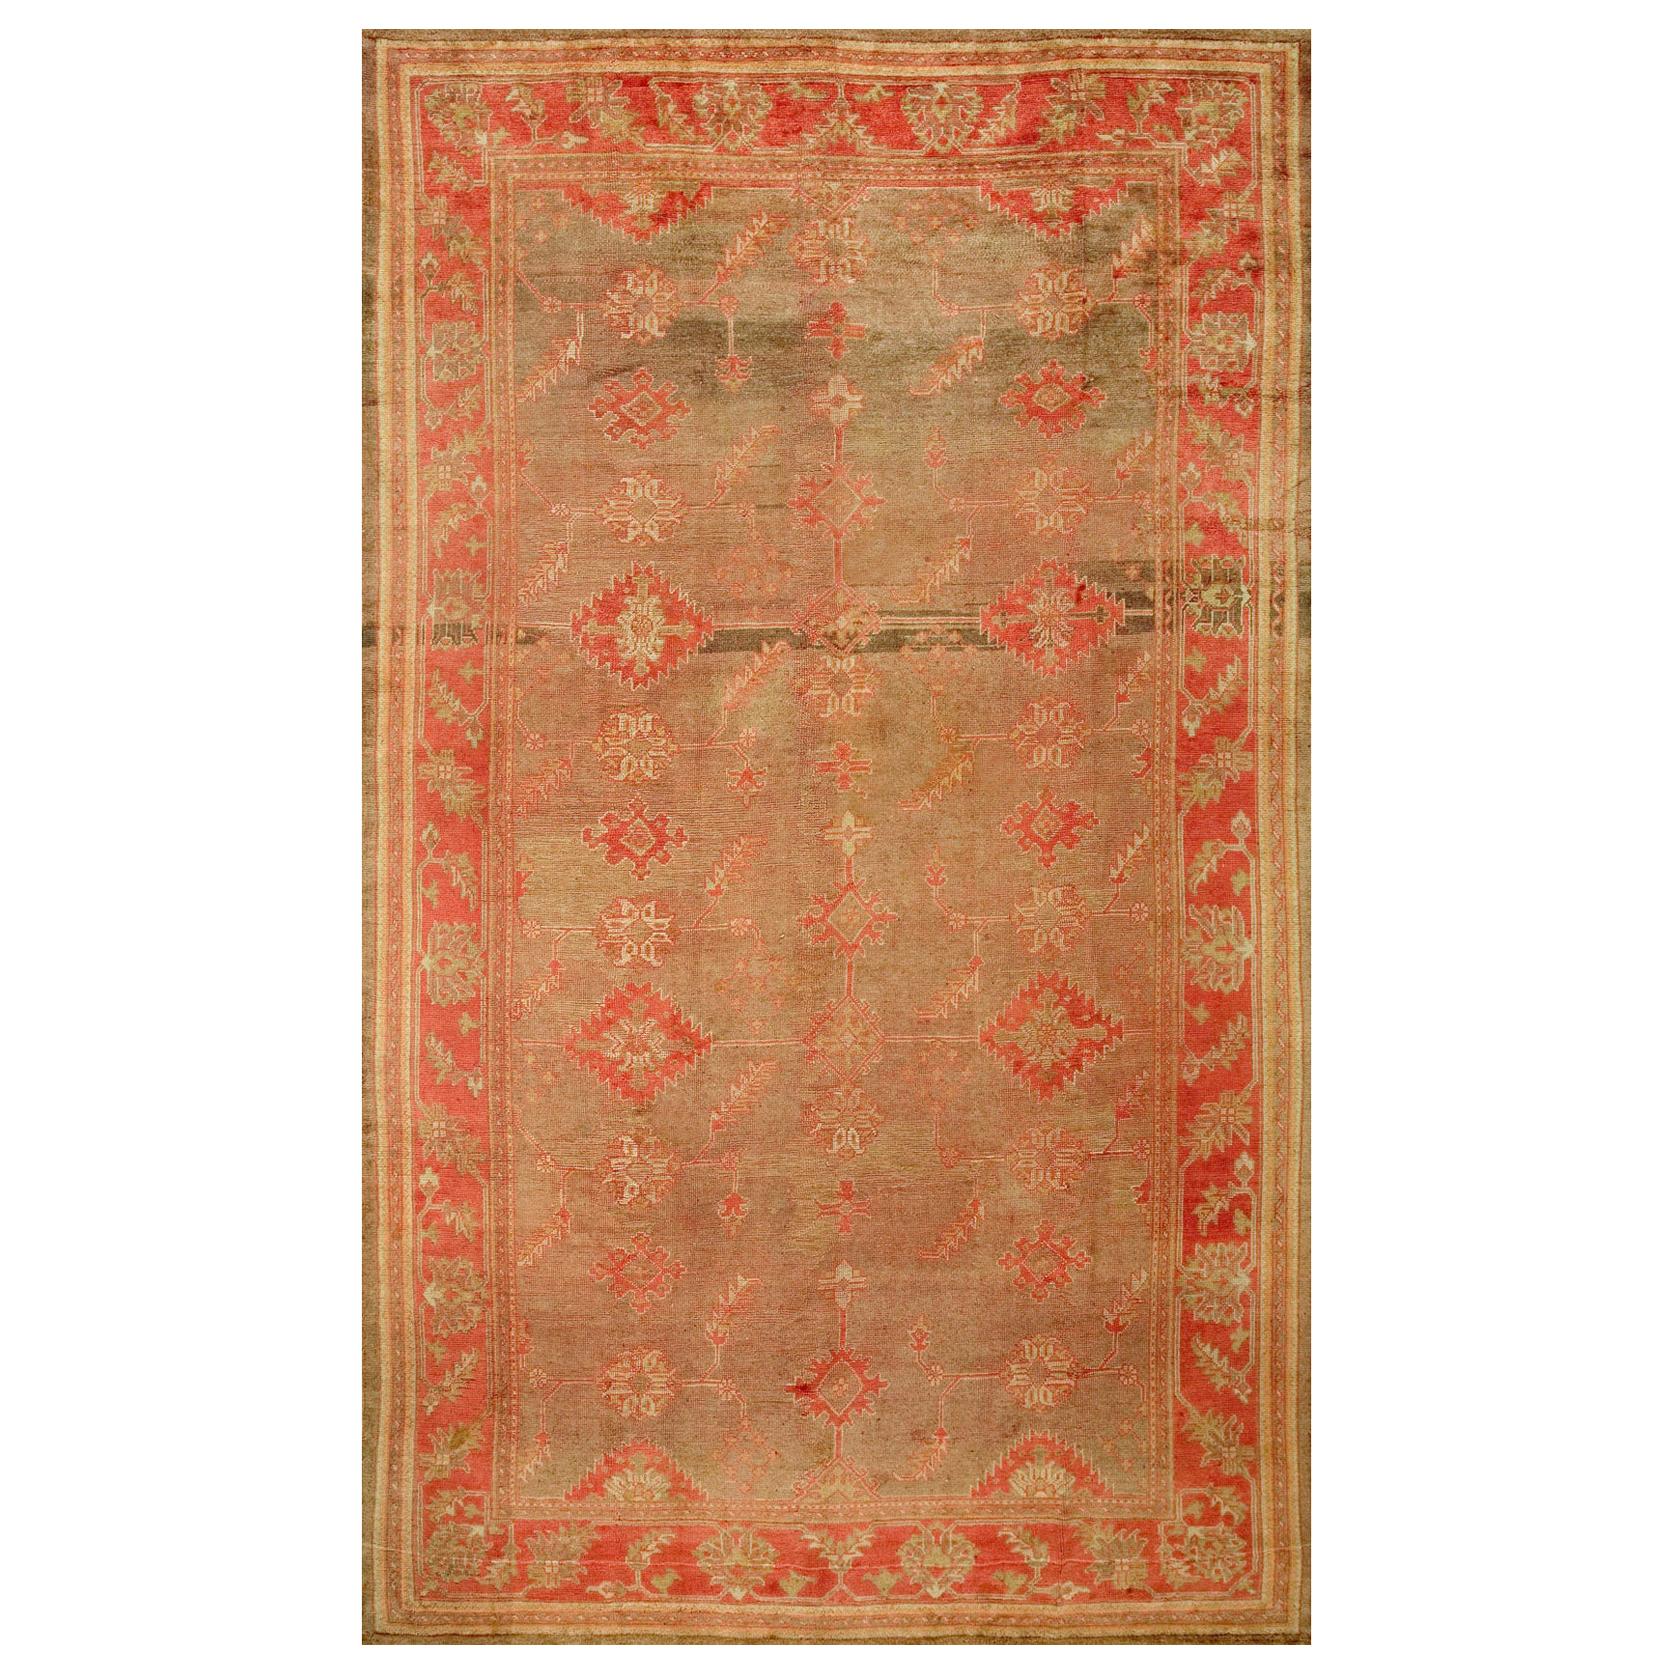 Early 20th Century Turkish Oushak Carpet  ( 9'6" x 16'6" - 290 x 503 ) For Sale